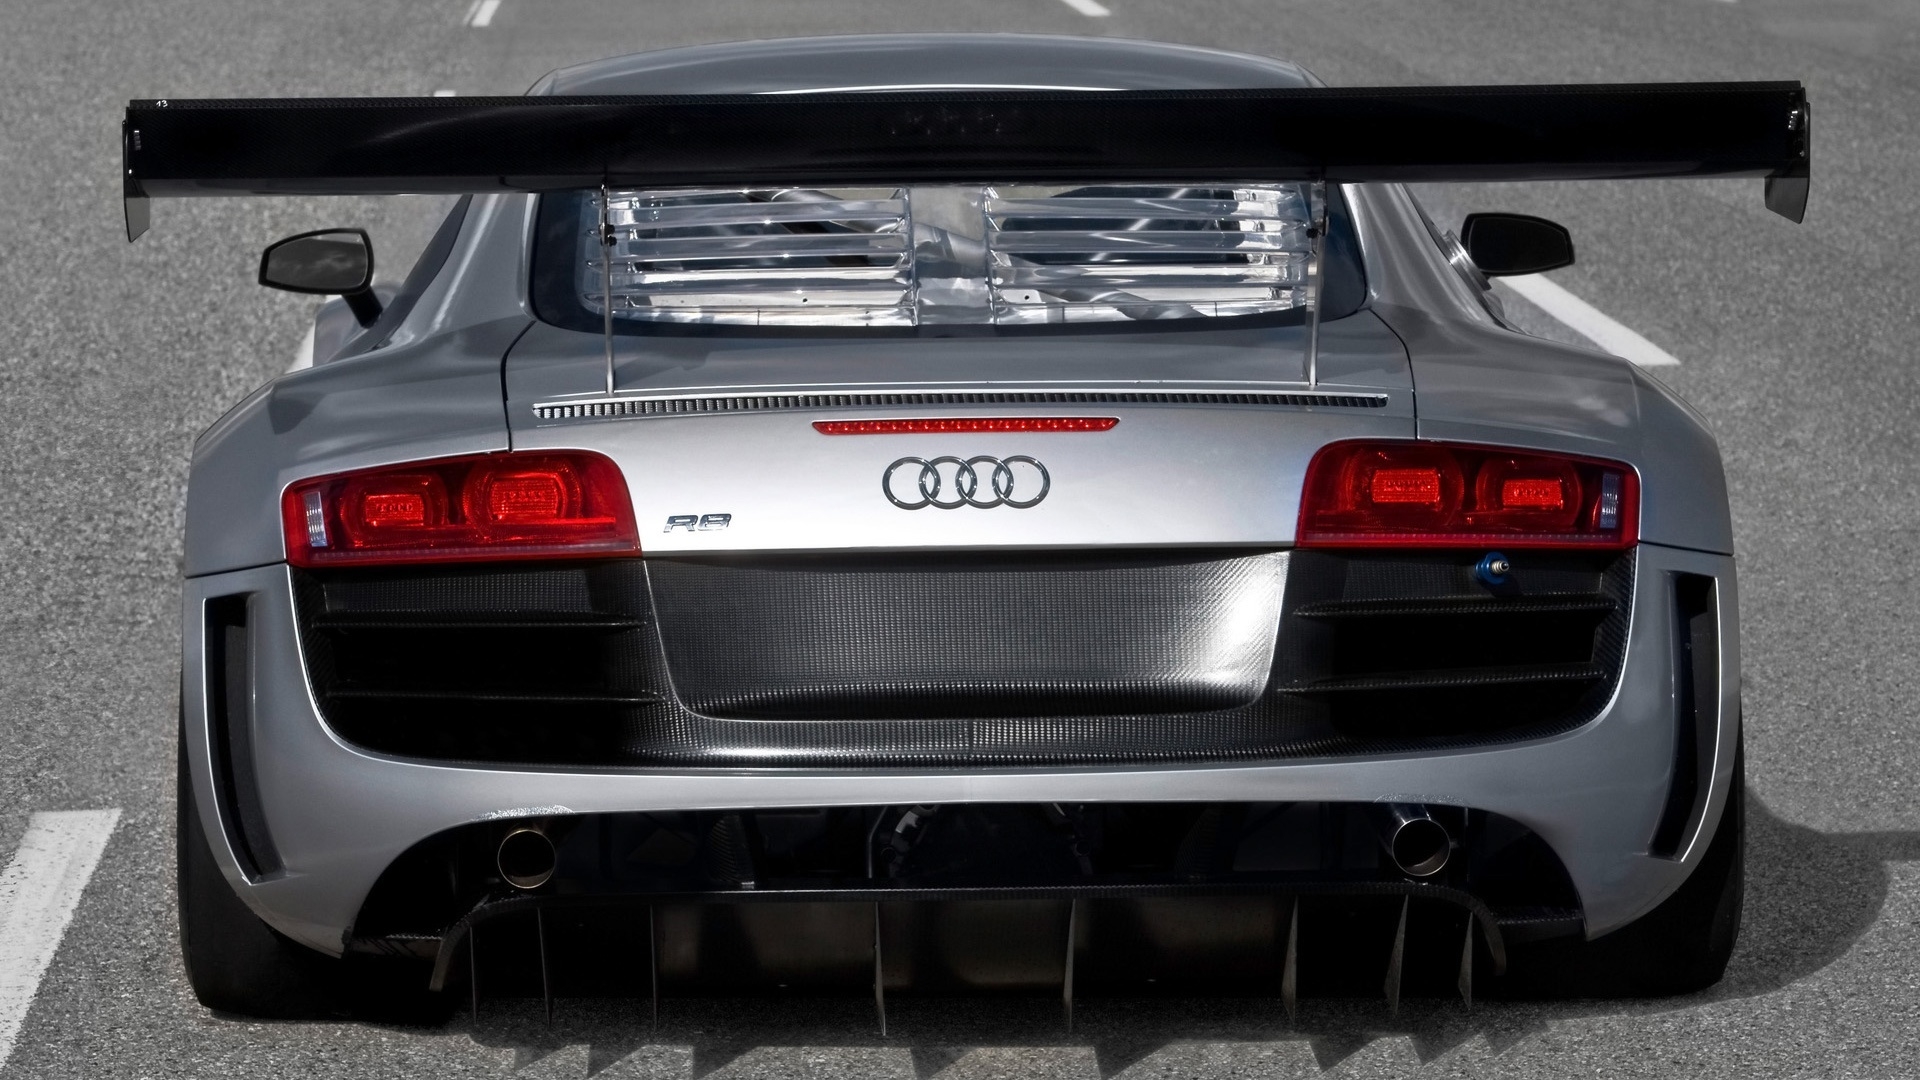 2009 Audi R8 GT3 - Rear for 1920 x 1080 HDTV 1080p resolution